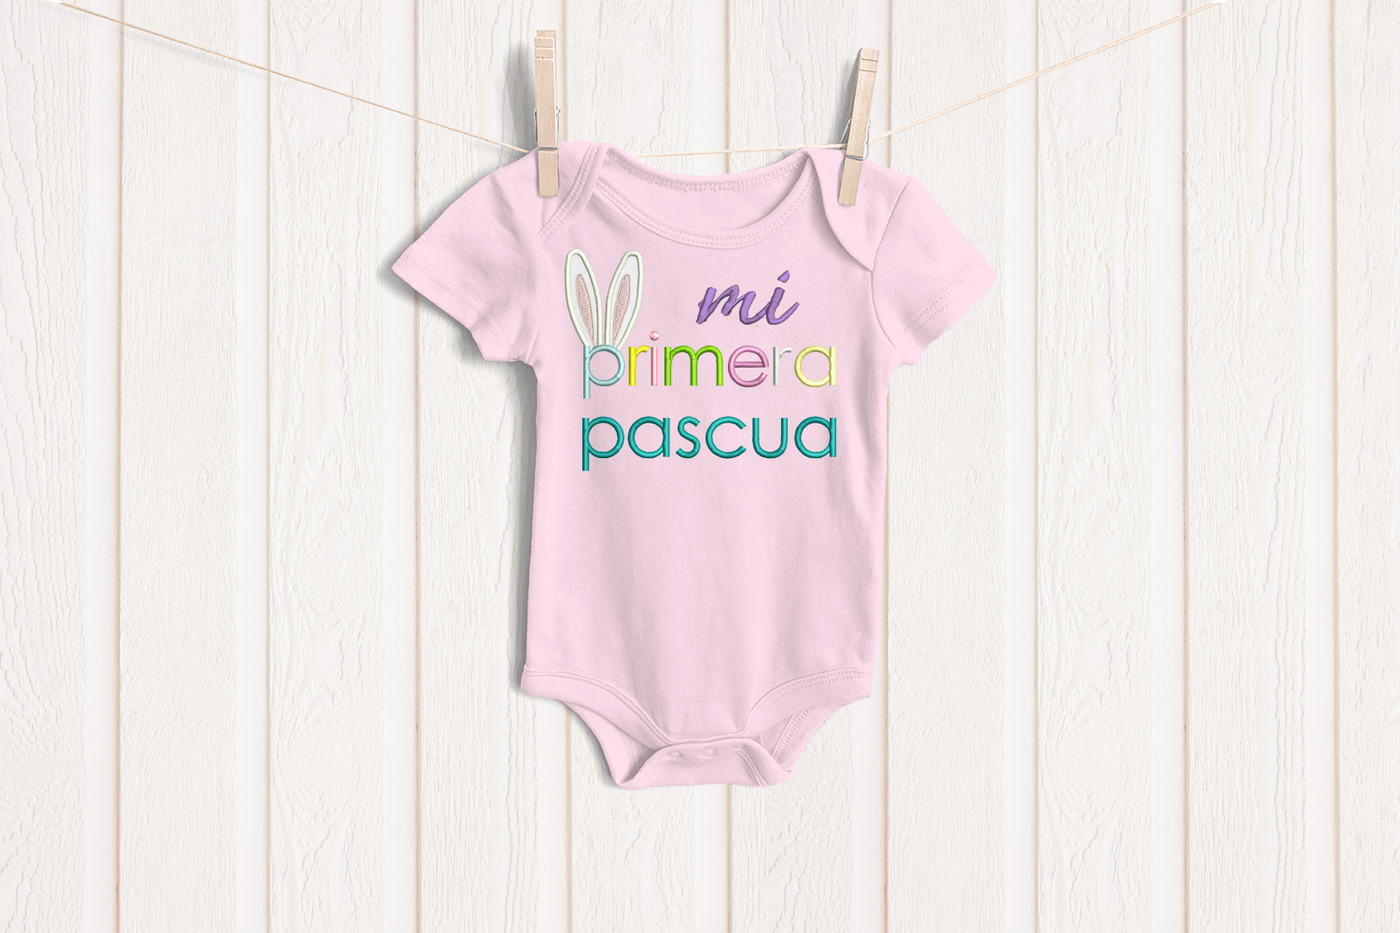 Baby onesie with embroidery that says "mi primera pascua" with rabbit ears on the p